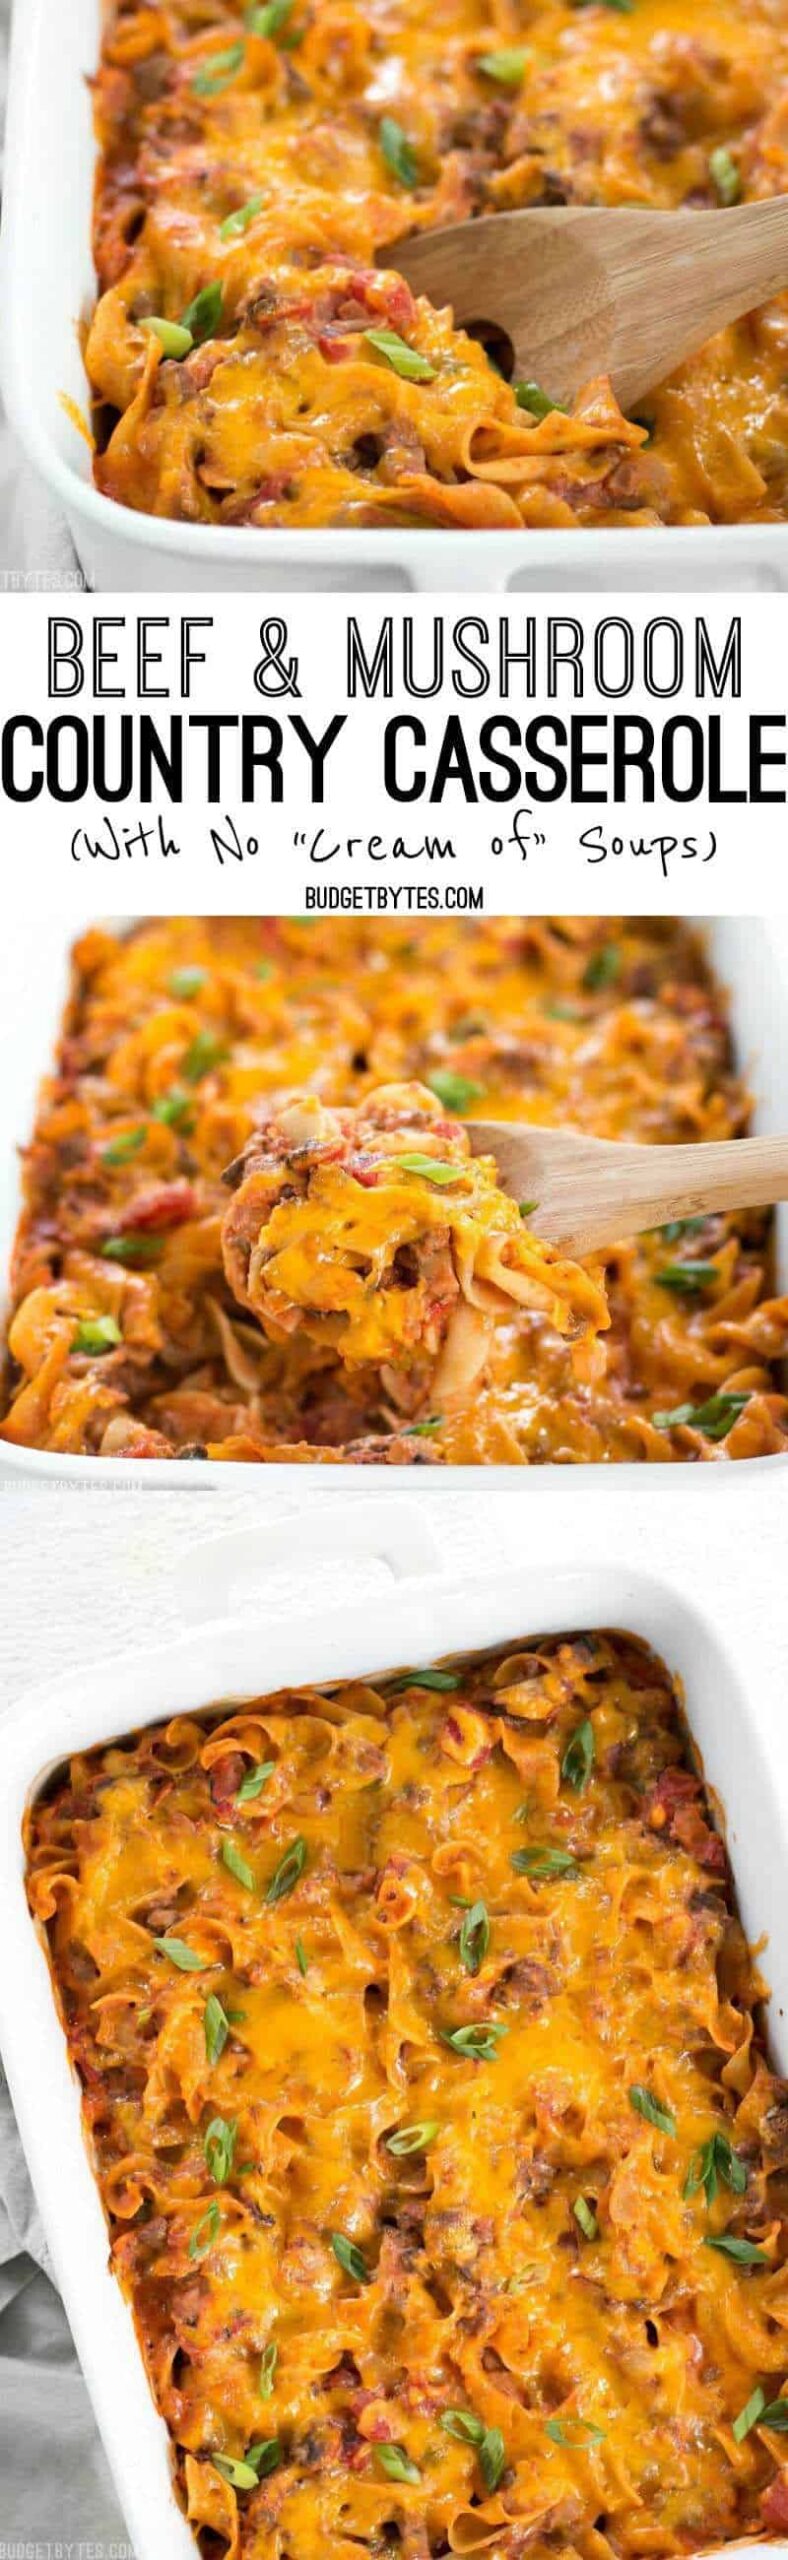 Beef & Mushroom Country Casserole is a filling and flavorful hot meal that the whole family will love, and with NO cream of soups! BudgetBytes.com